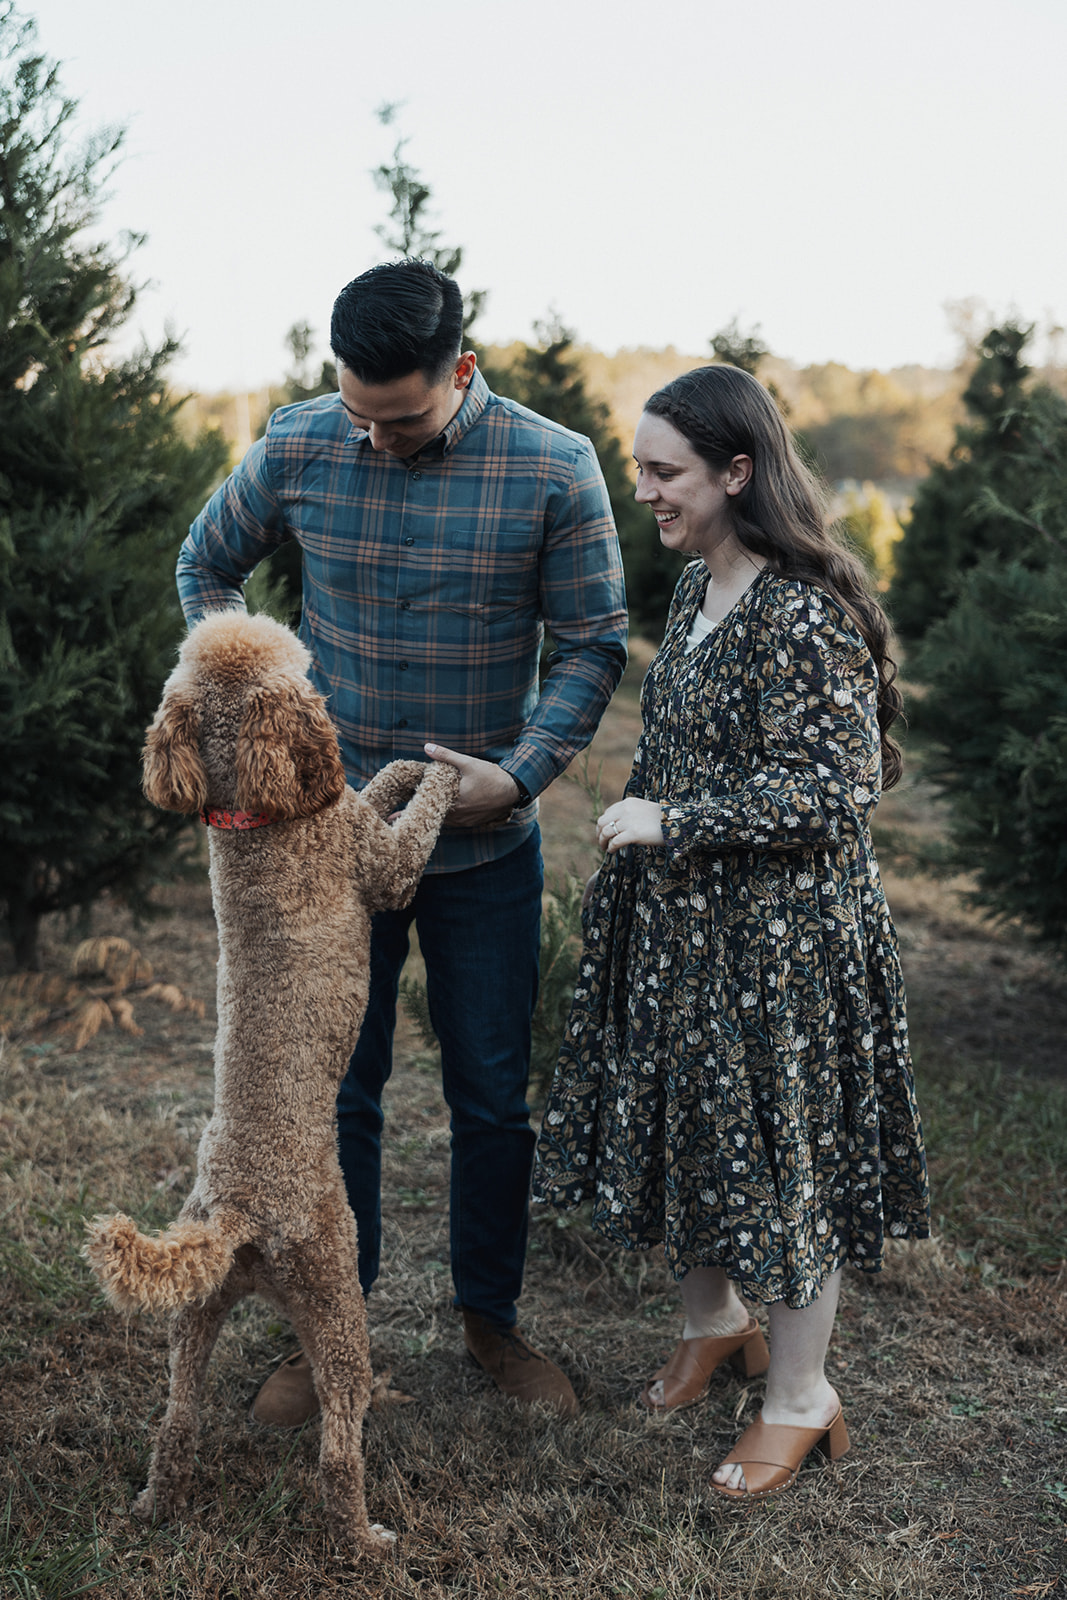 Stunning couple pose together with their dog